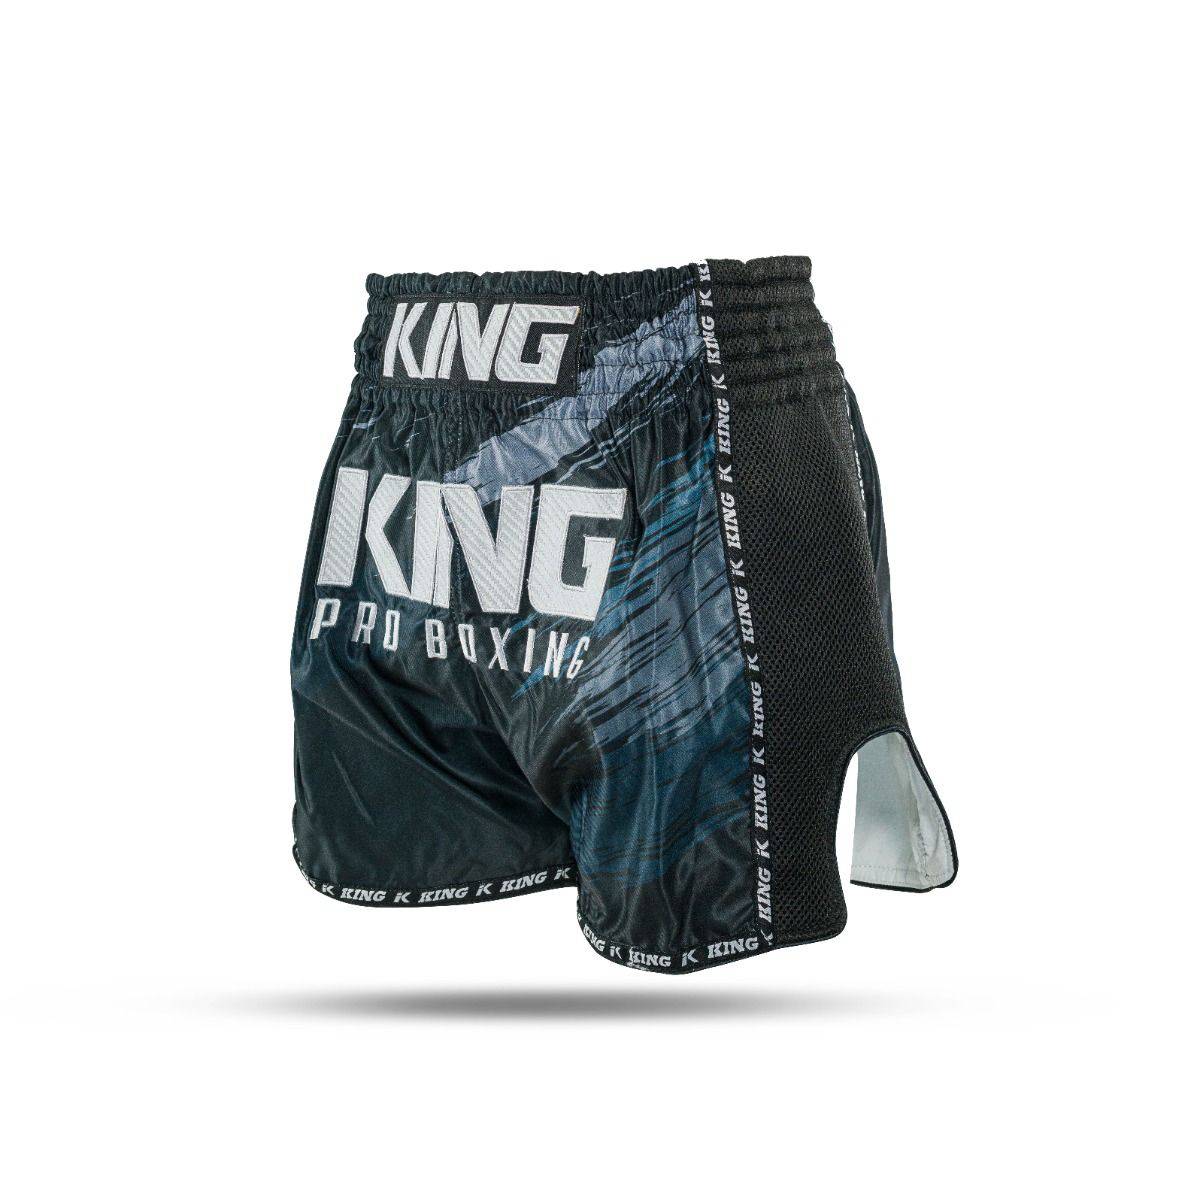 King storm short - Booster Fight Store